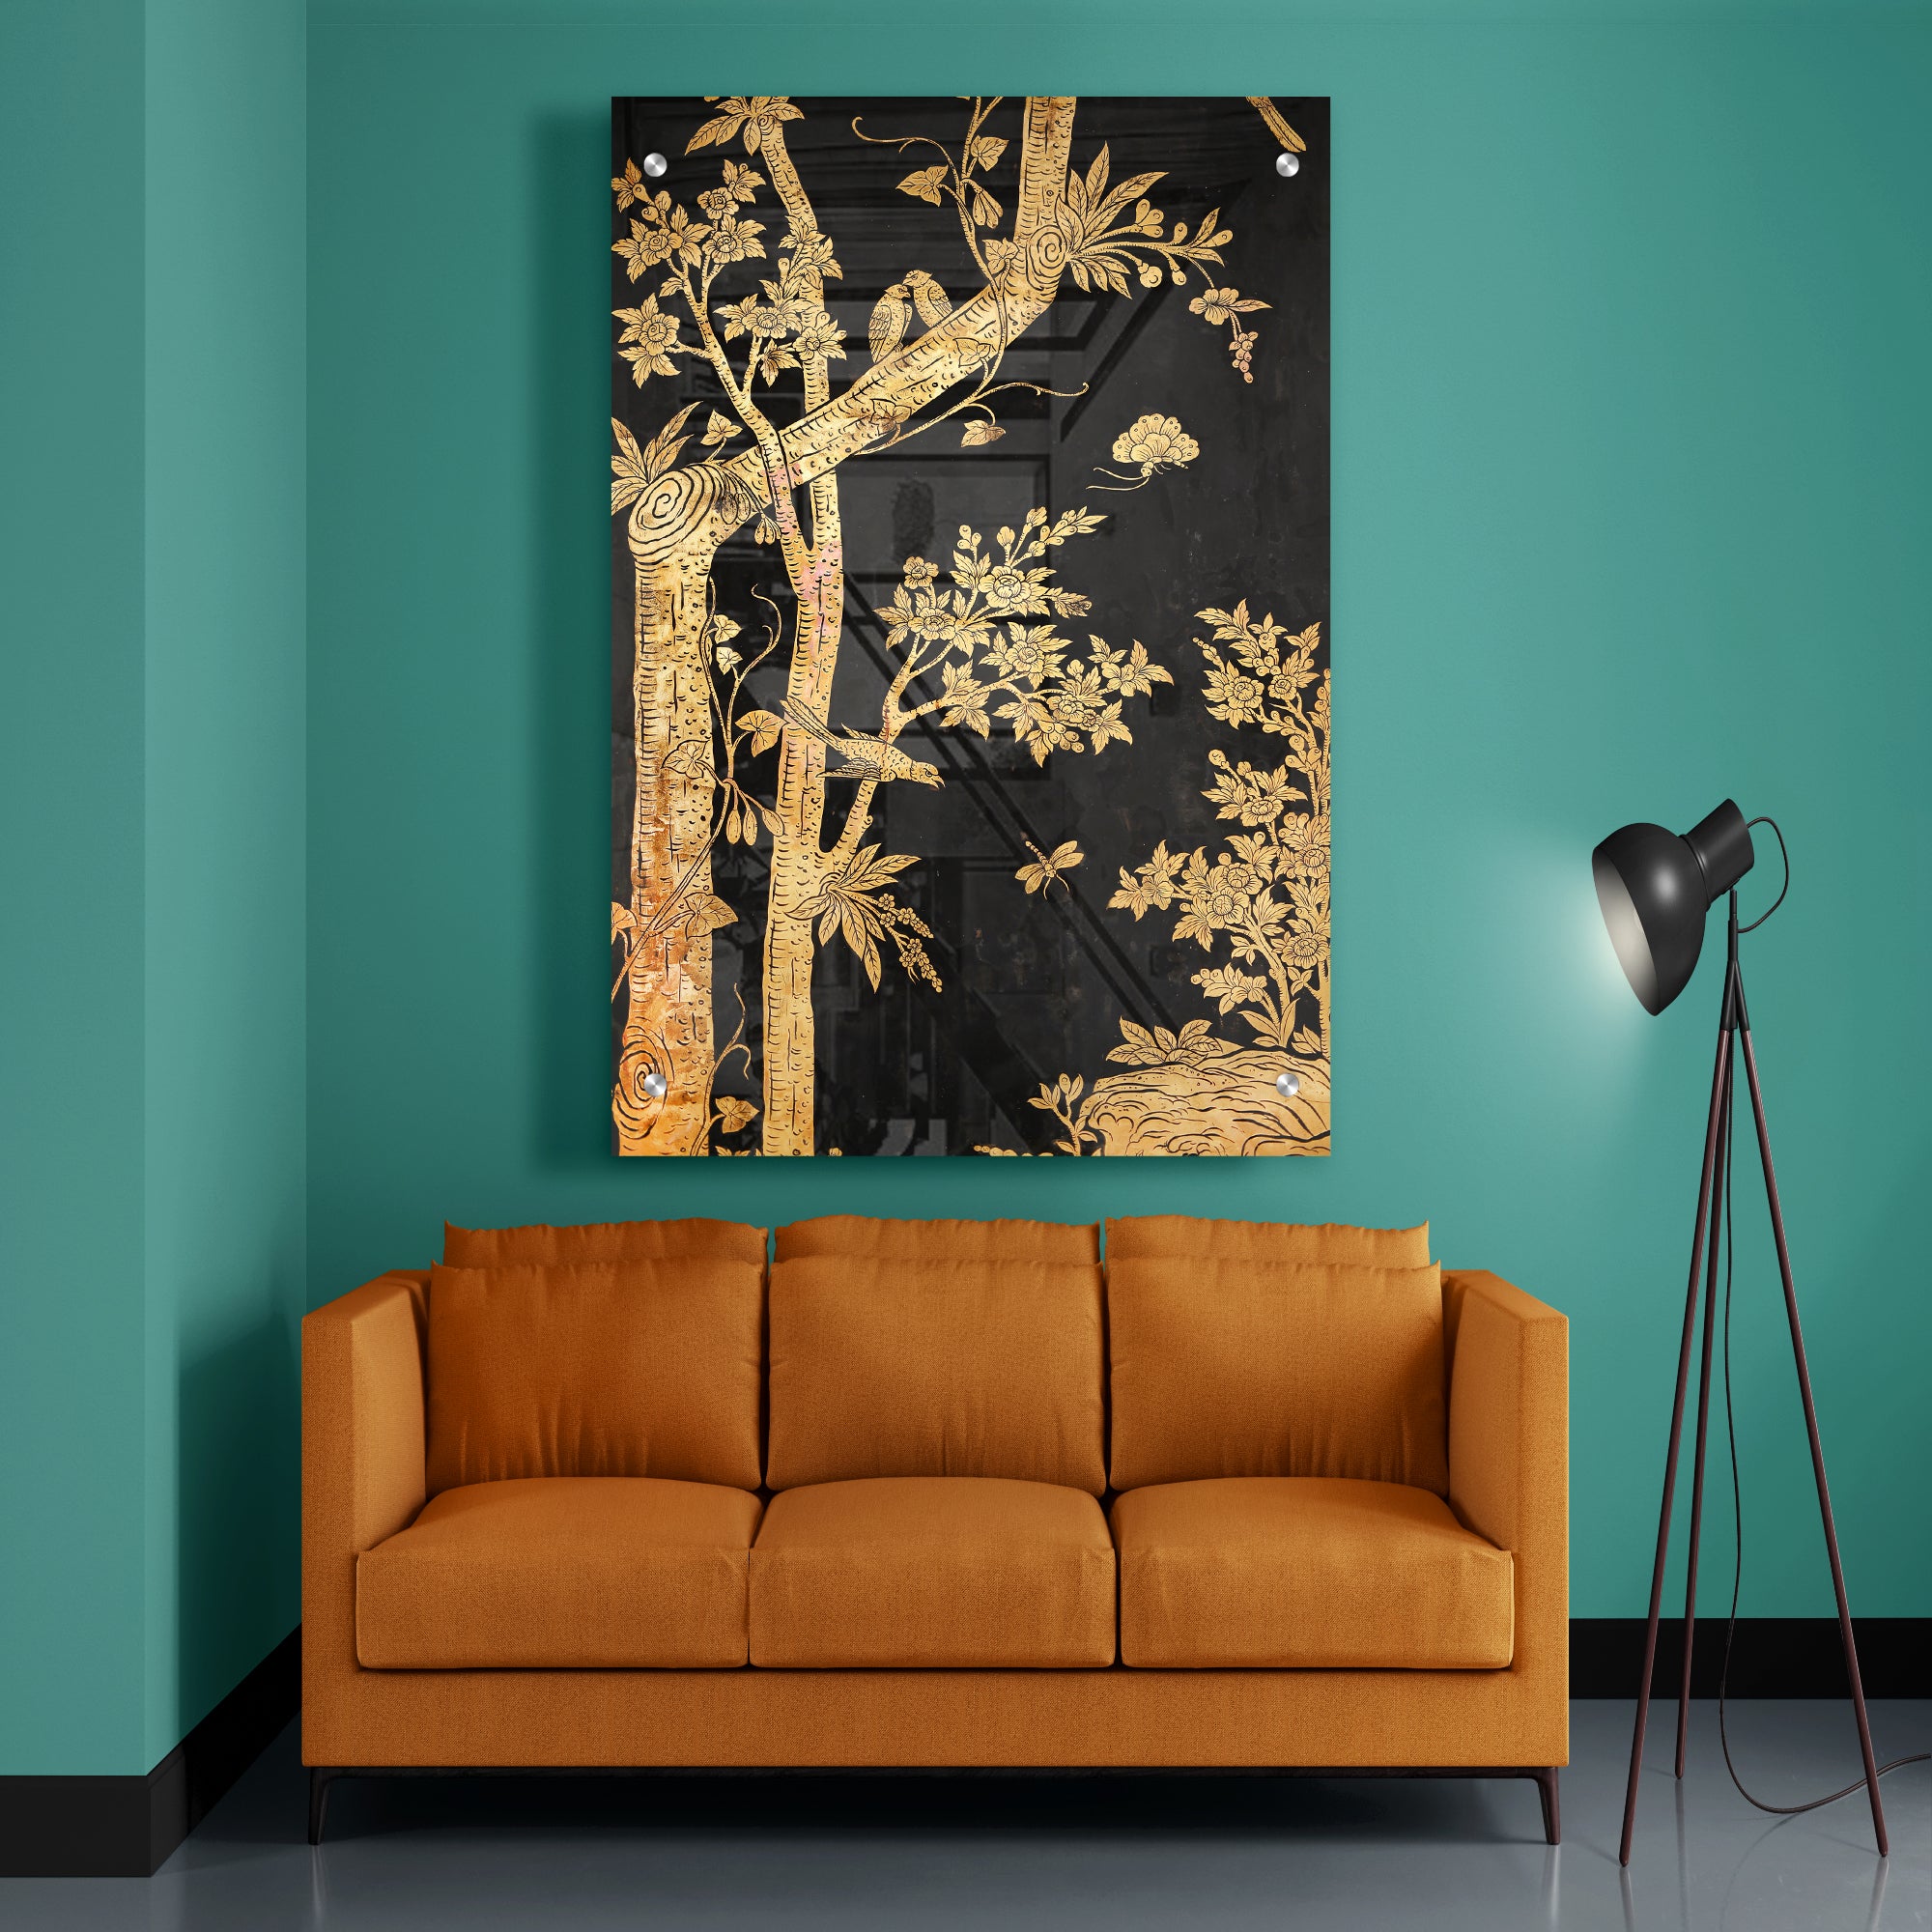 Golden Tree And Black Backgound Acrylic Wall Painting